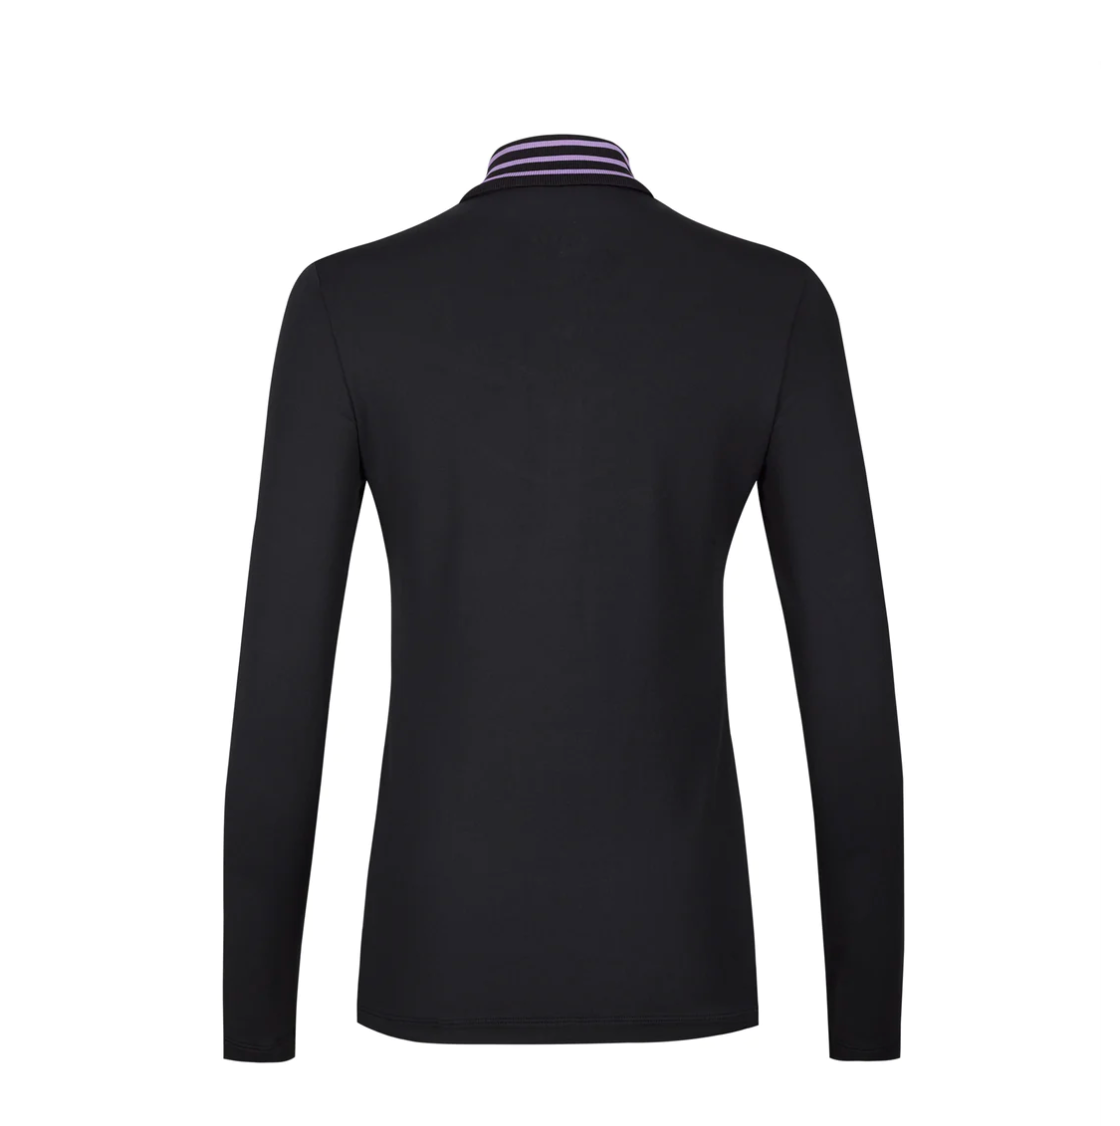 Astrid Long Sleeve Top - Navy/Lilac